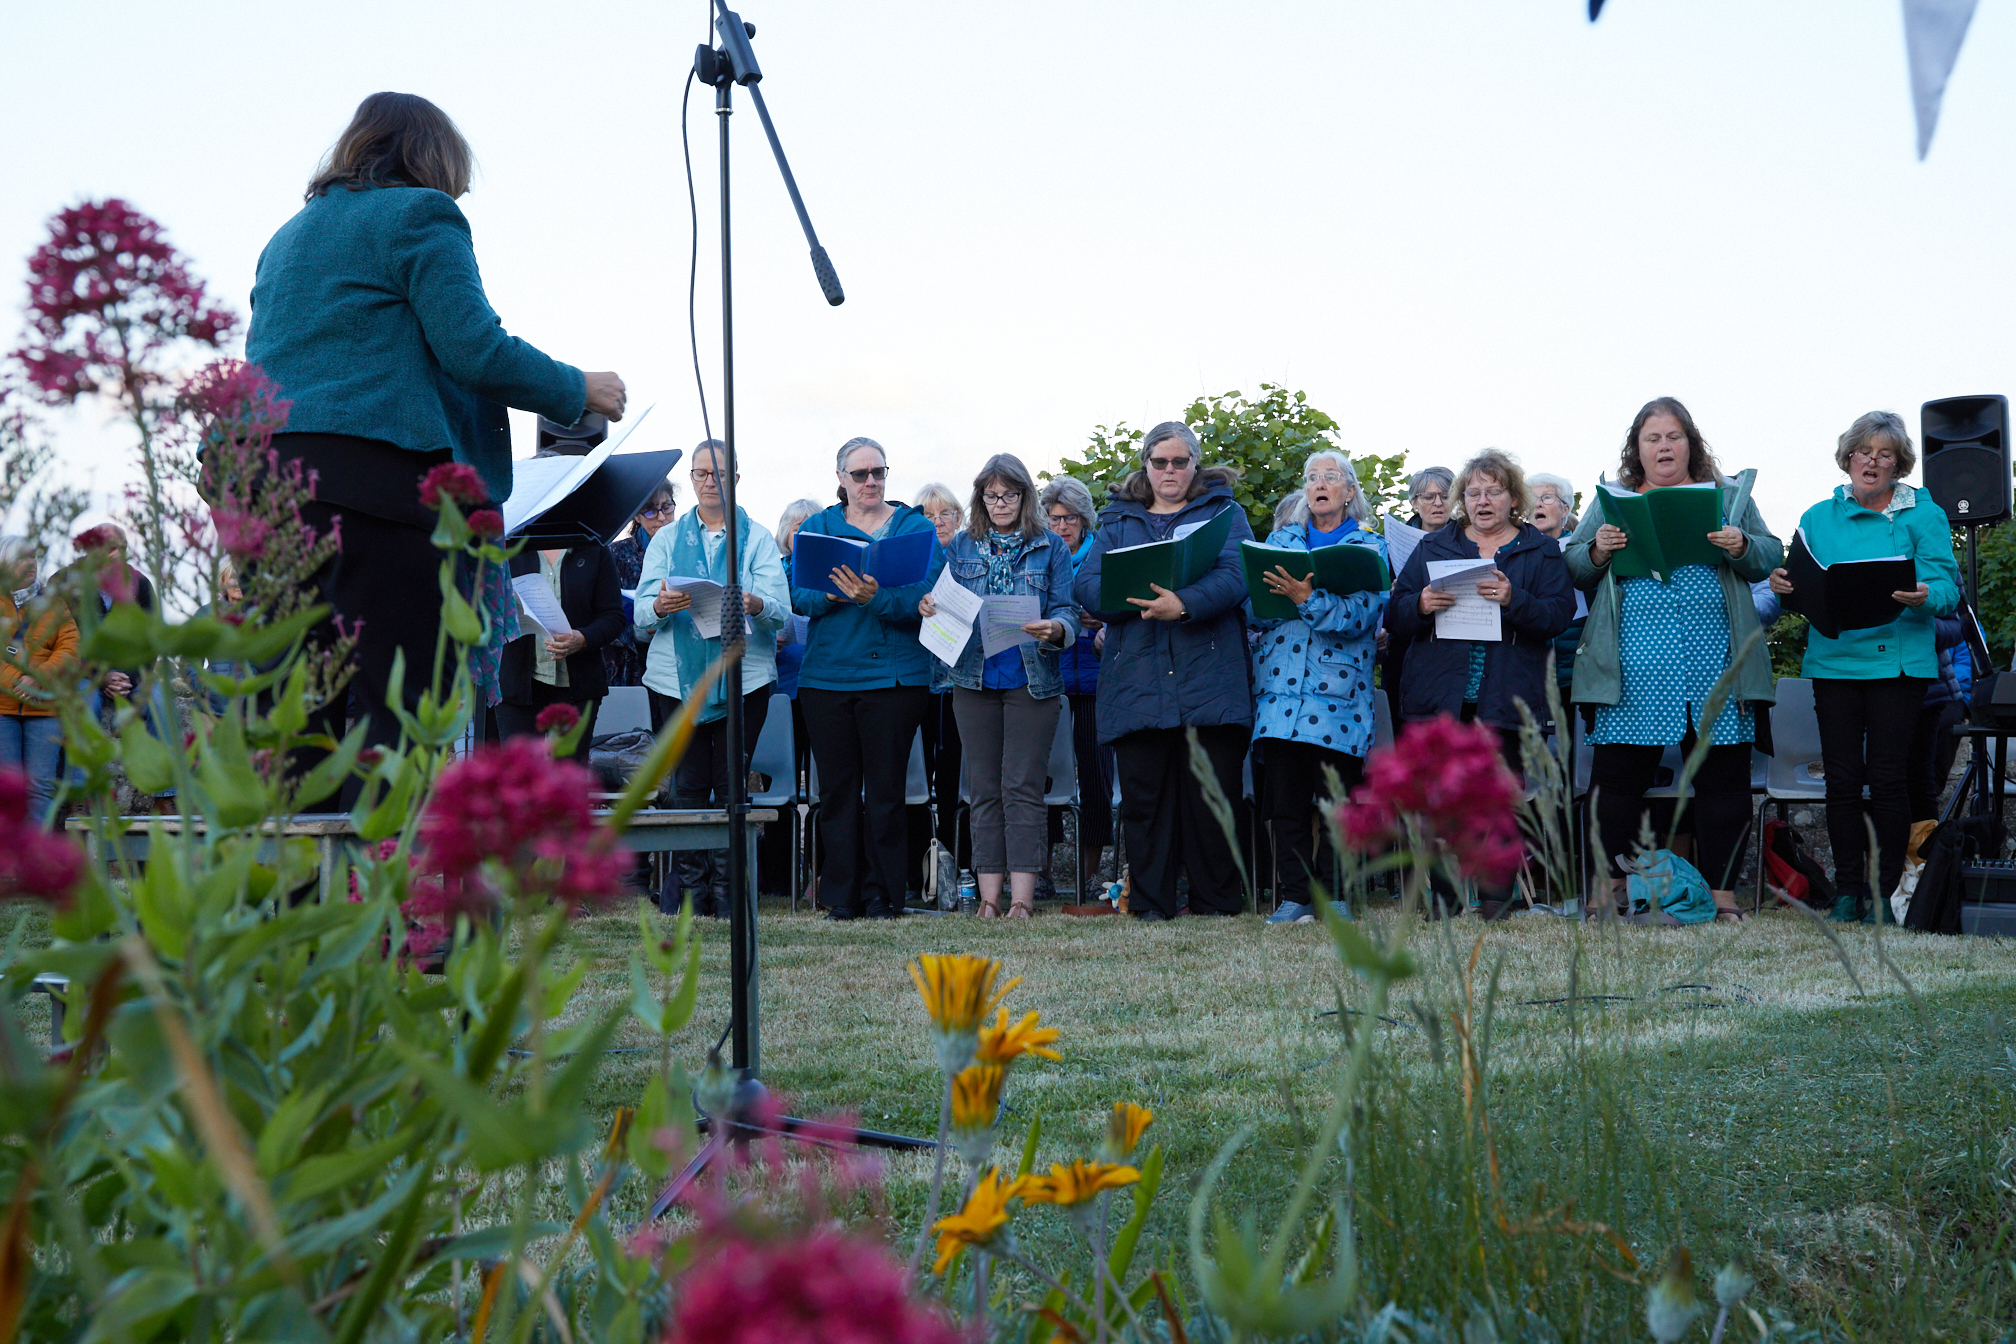 Local choir, the Scilly Sirens performing at the D-Day 80th Anniversary commemoration ceremony